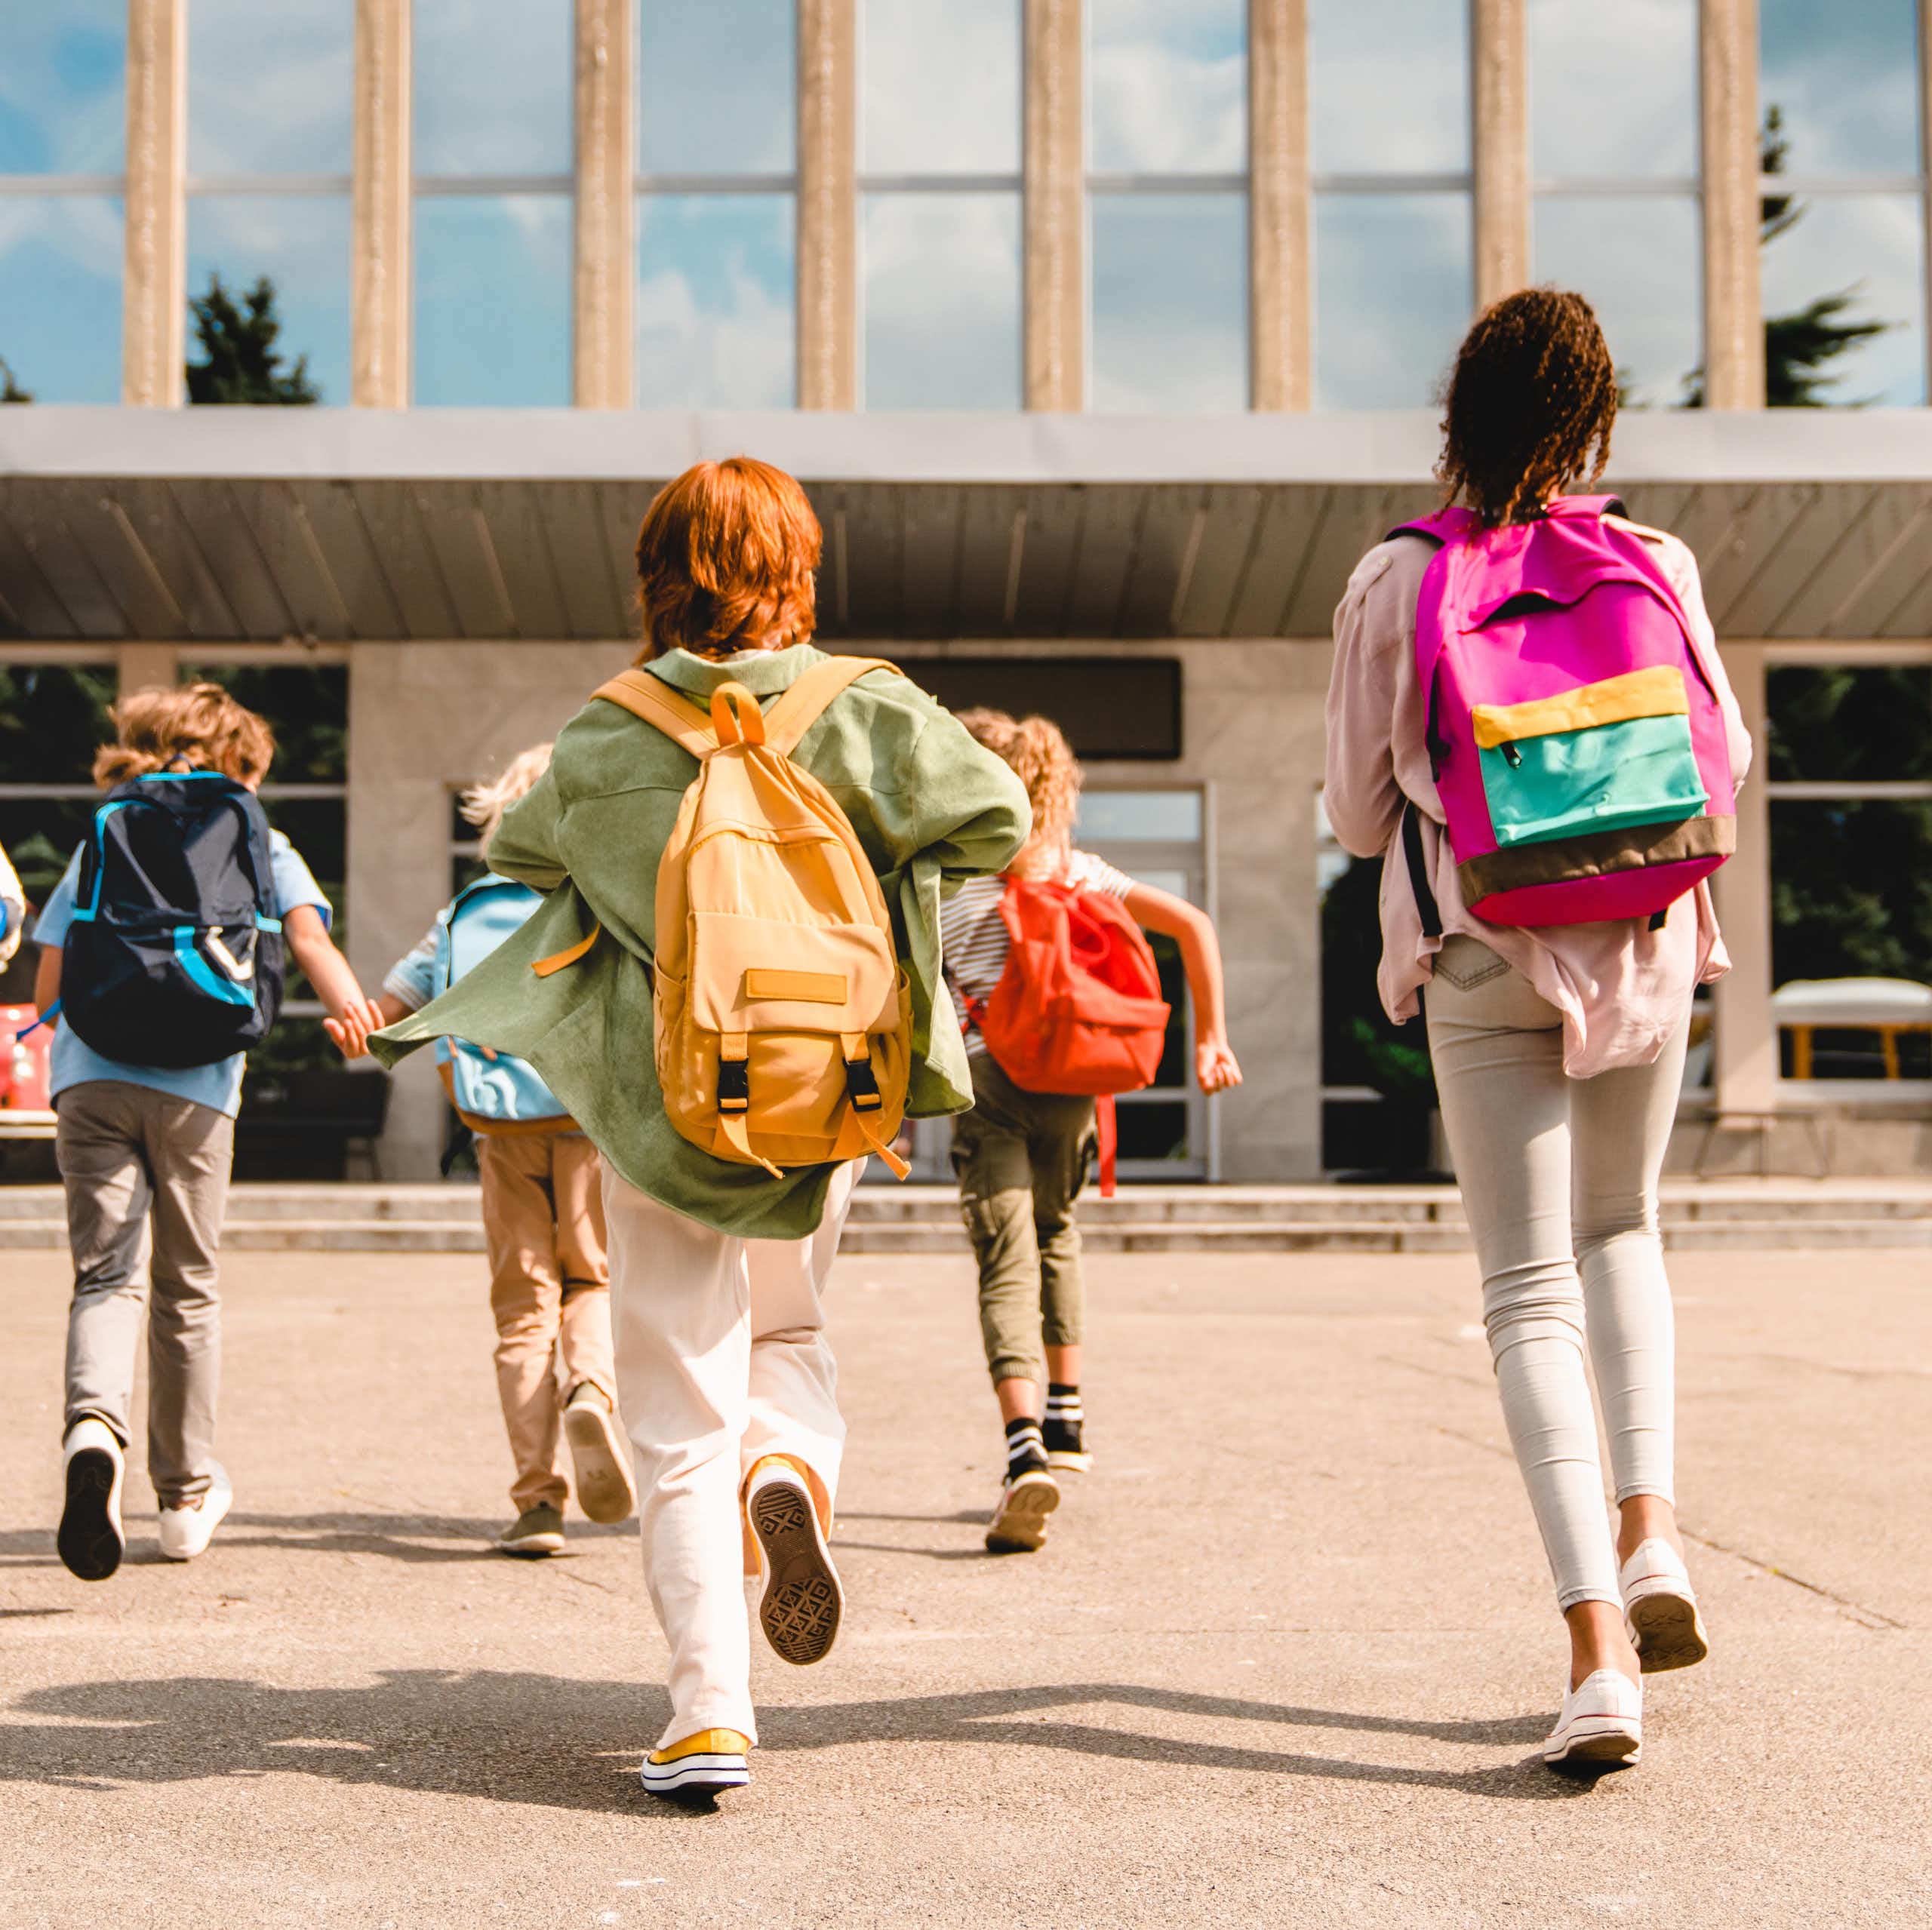 View from behind of six young students dressed in colourful clothing and backpacks, running into a school building